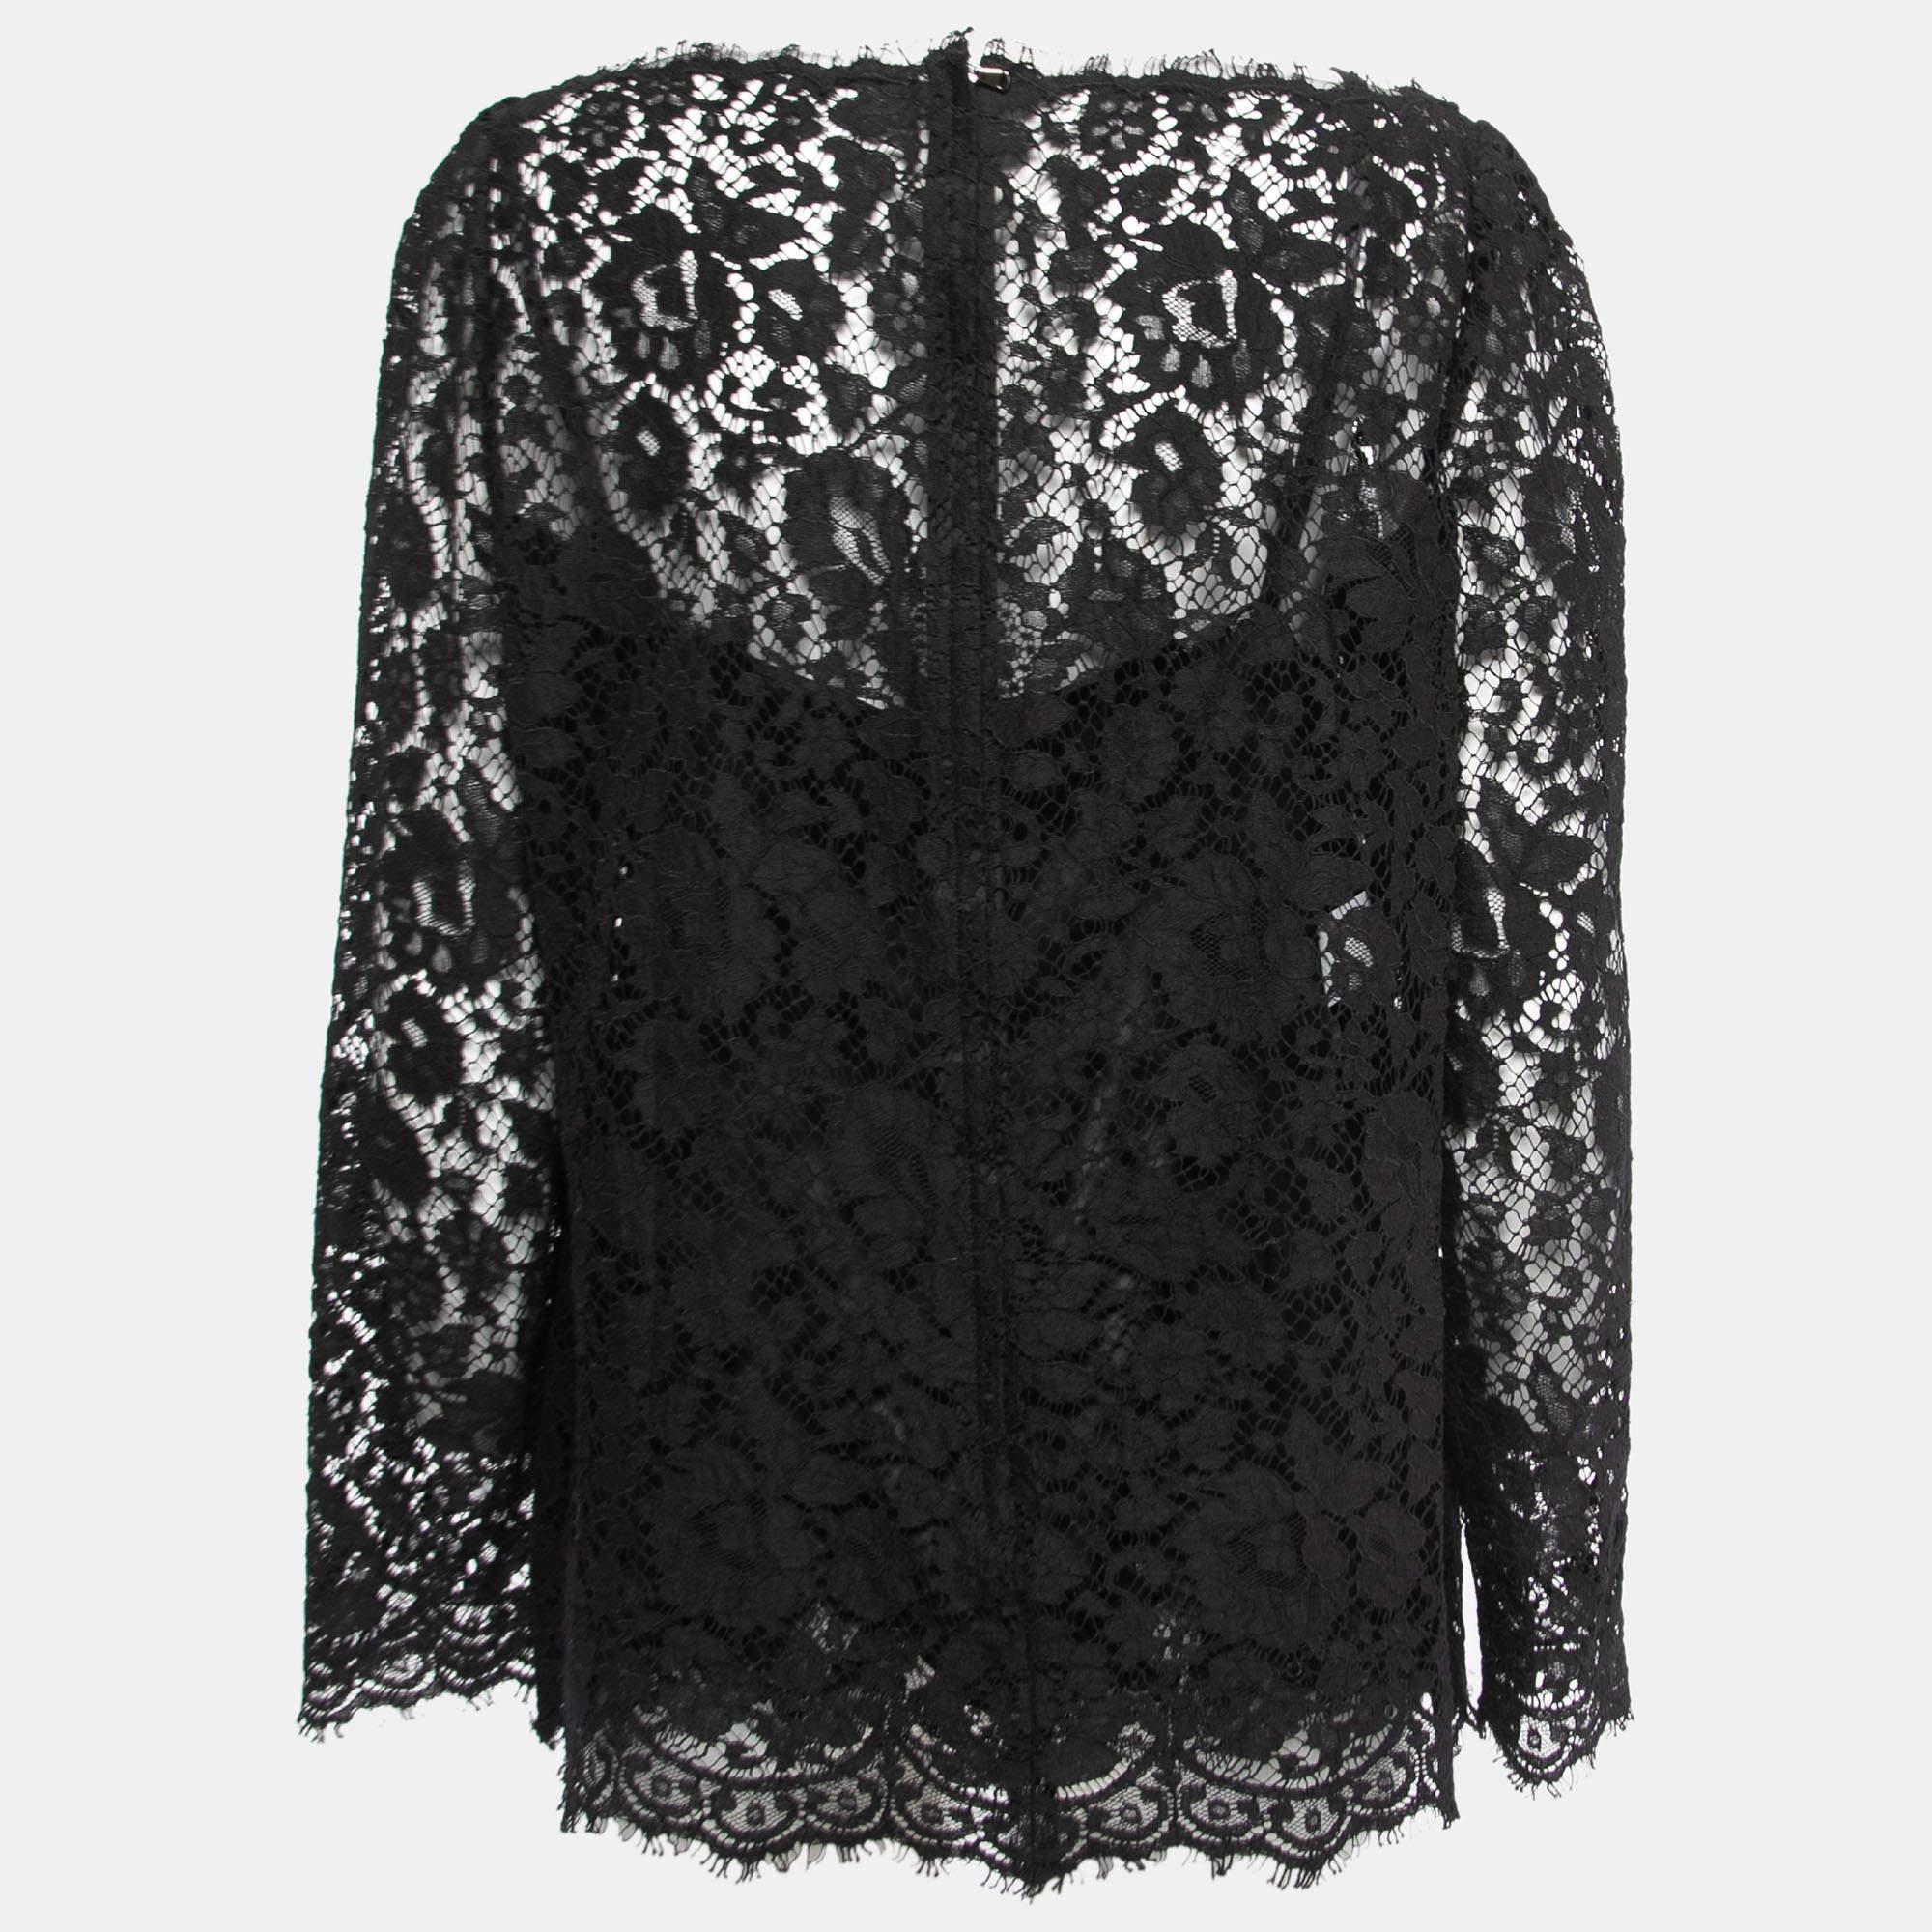 Careful tailoring, quality materials, and elegant cuts make this Dolce & Gabbana top a piece to cherish! It comes in a classic design to be easy to style.

Includes: Inner garment